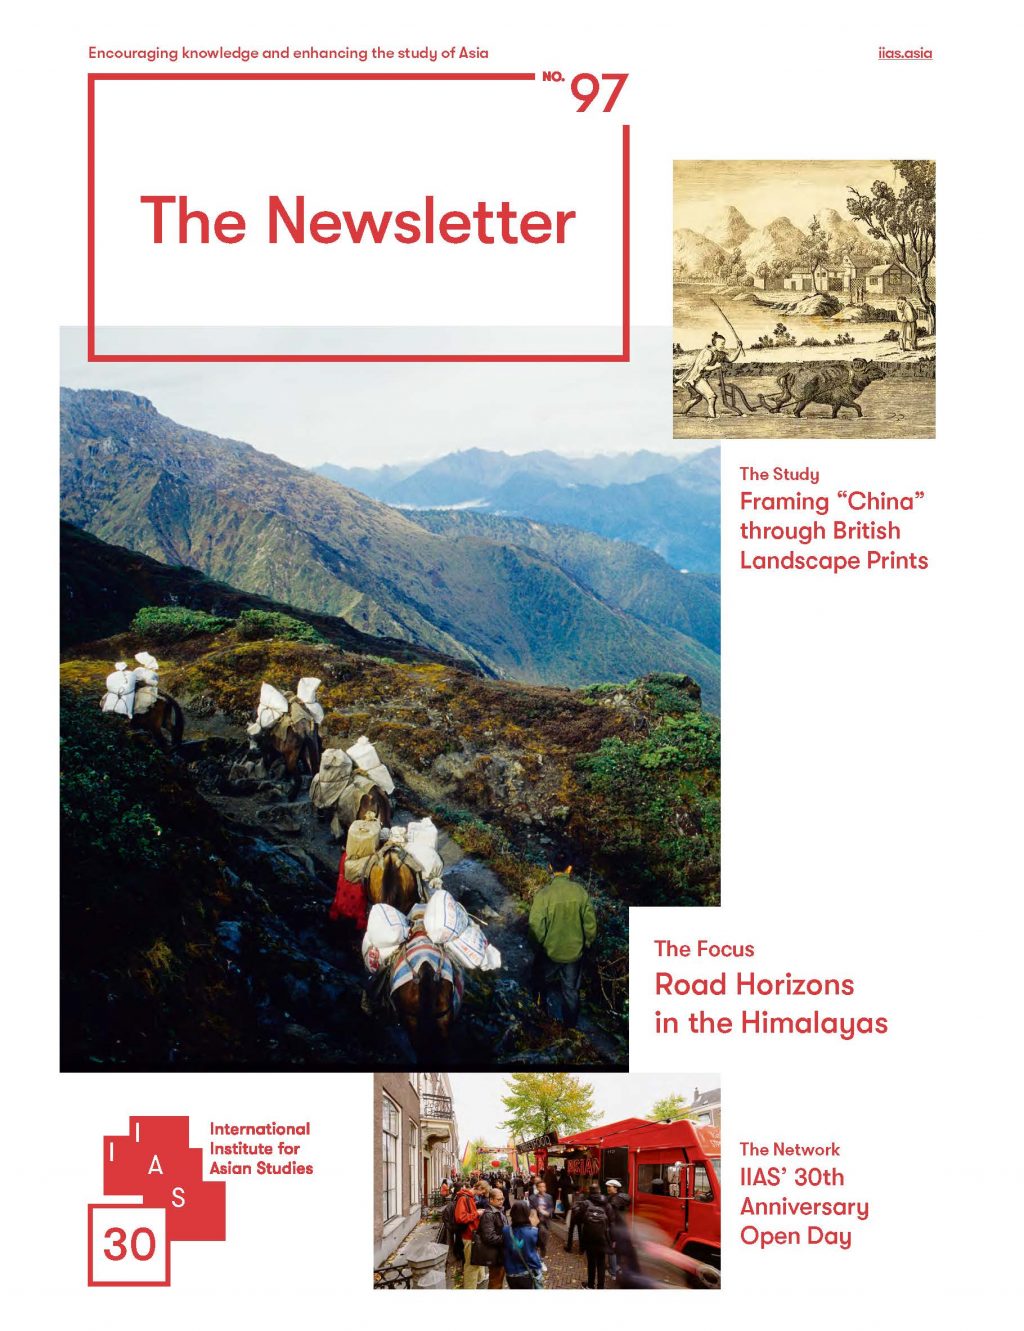 IIAS The Newsletter Vol. 97- News from Northeast Asia